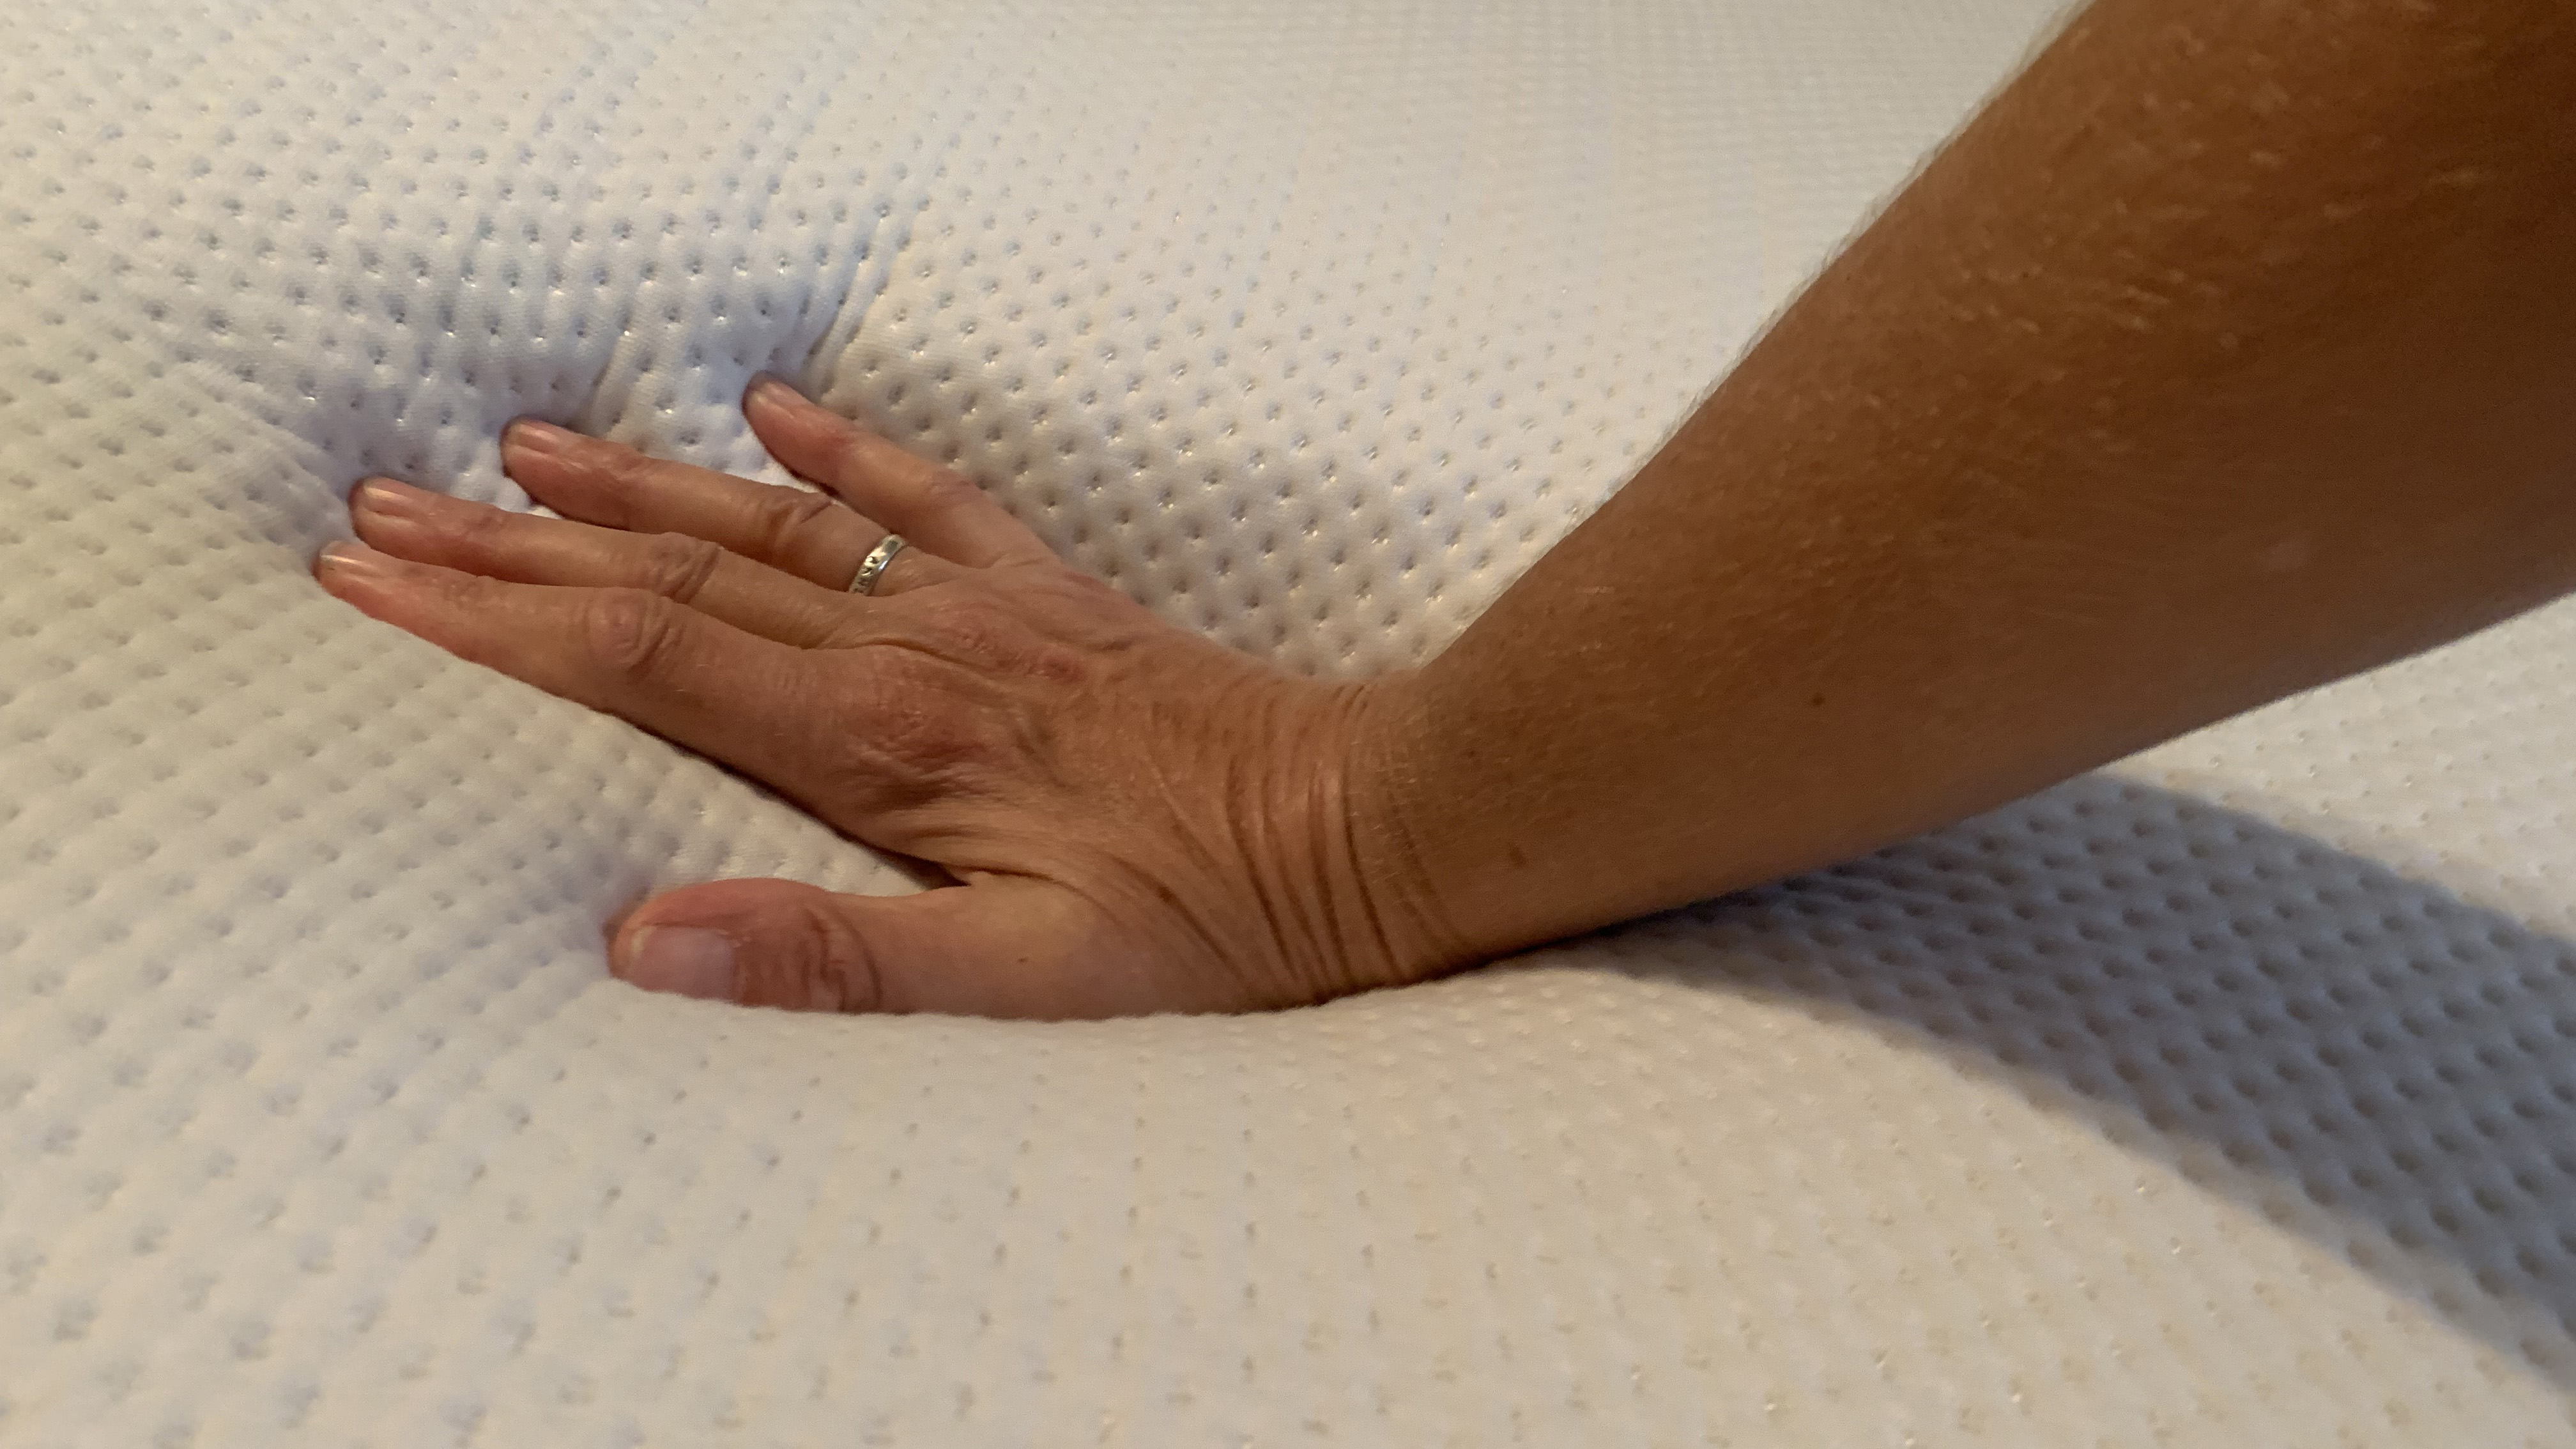 Our reviewer places her hand on the top of the Purple Plus Mattress to see how cool to the touch it feels